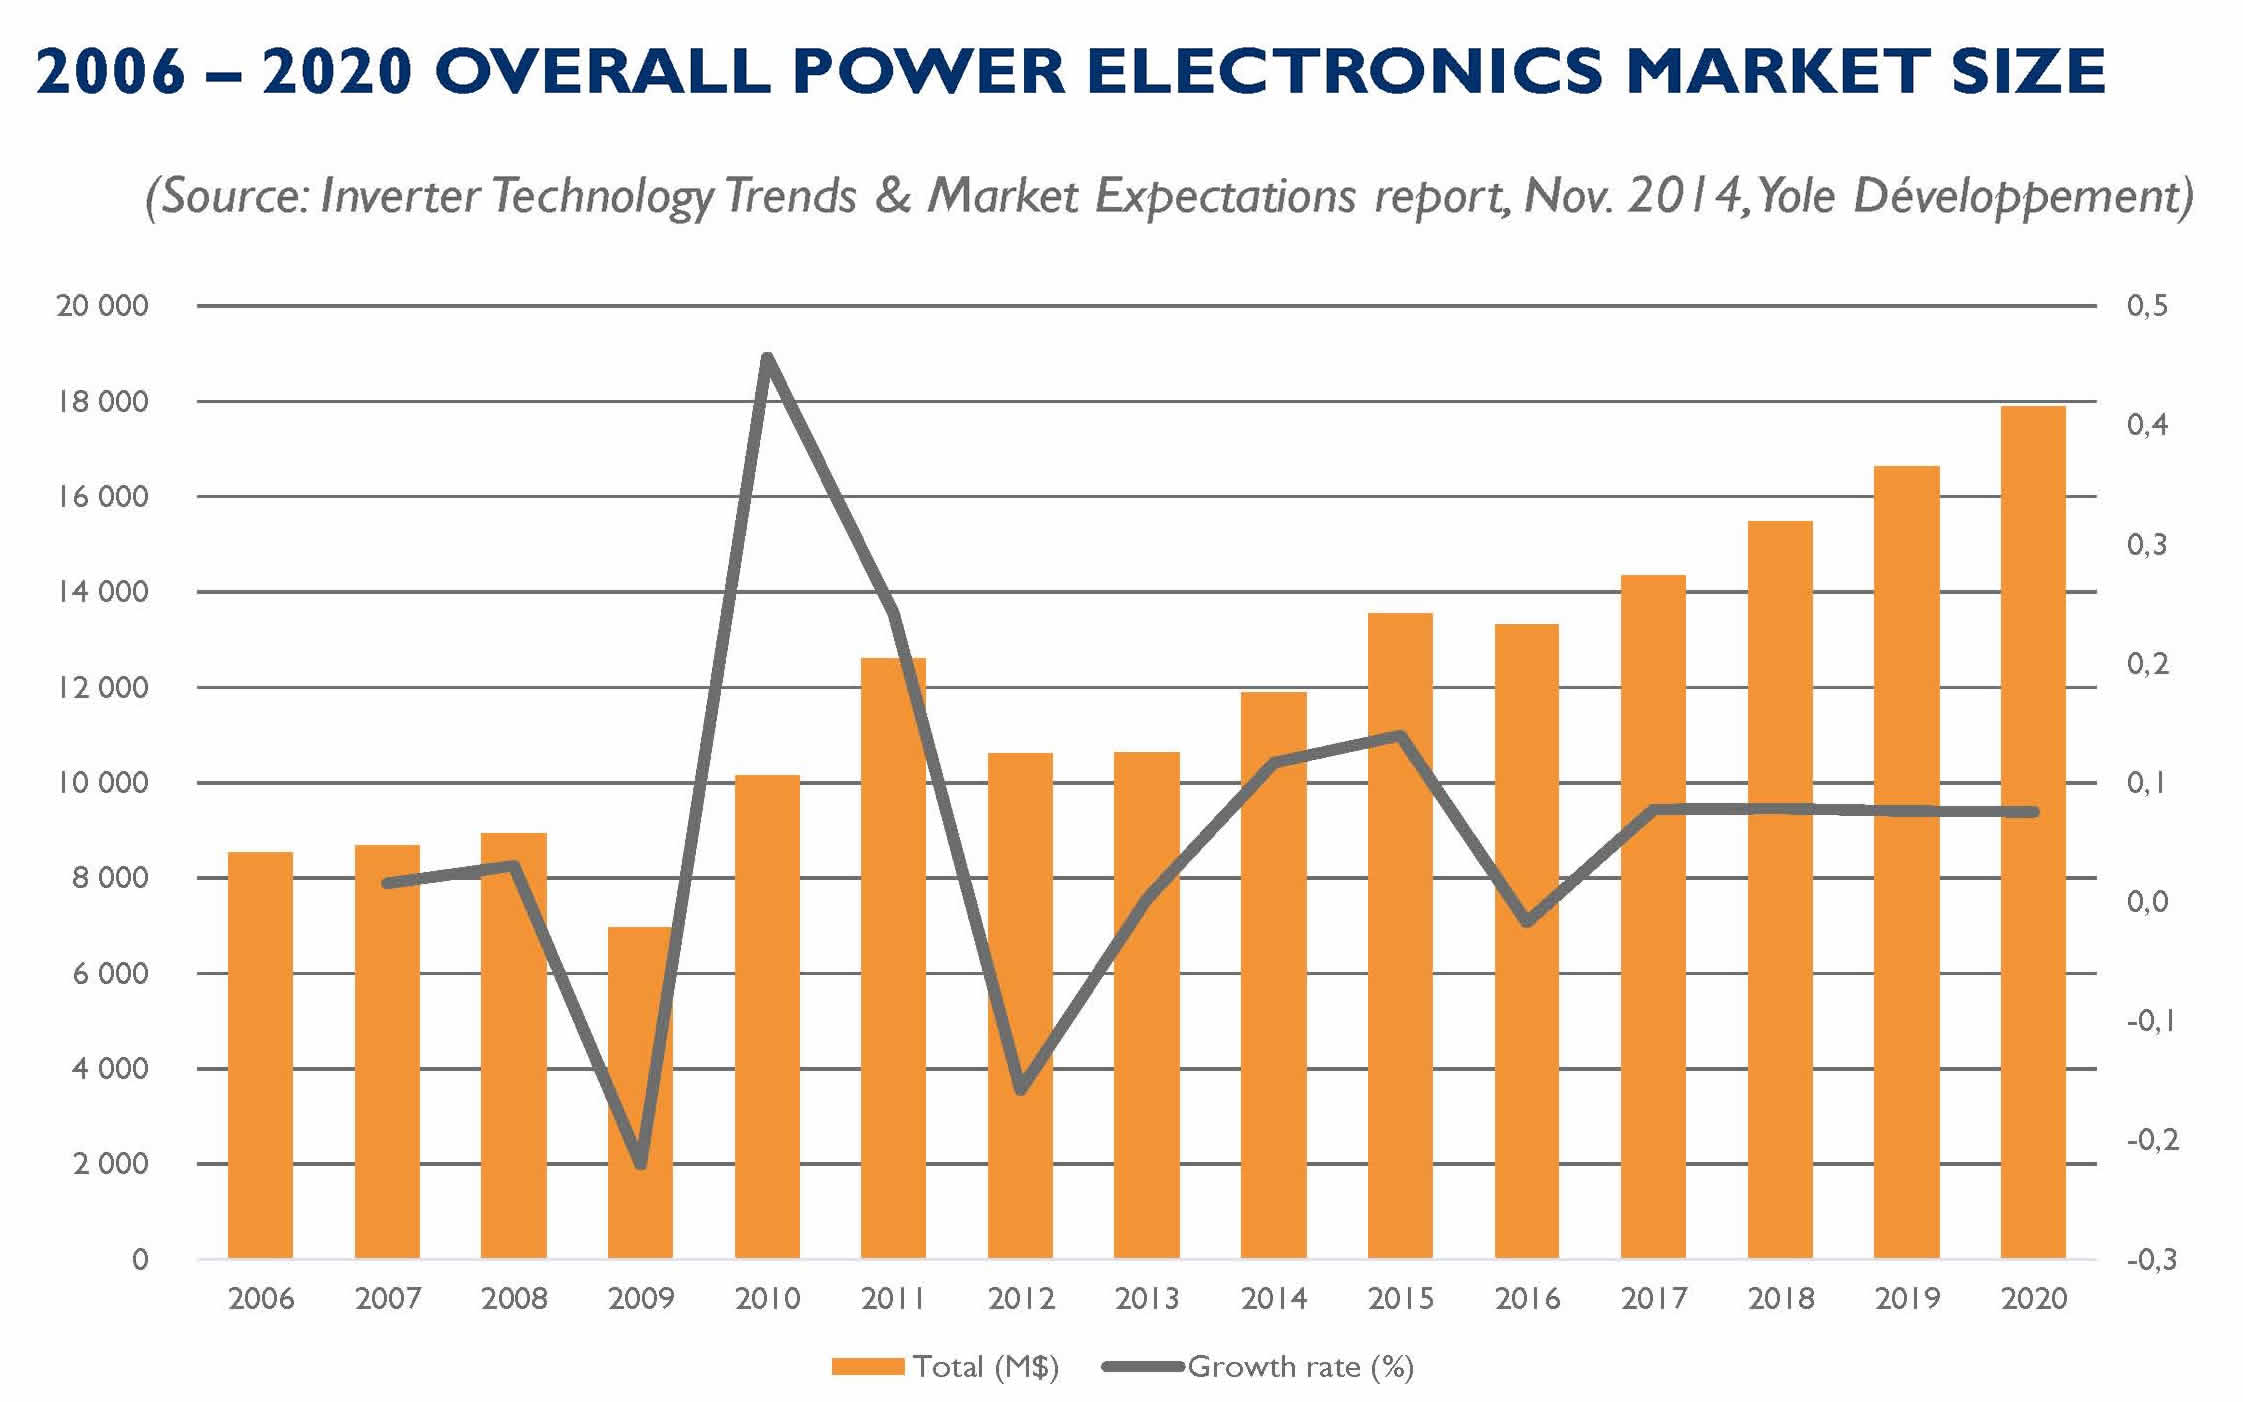 Yole explores the power electronics industry